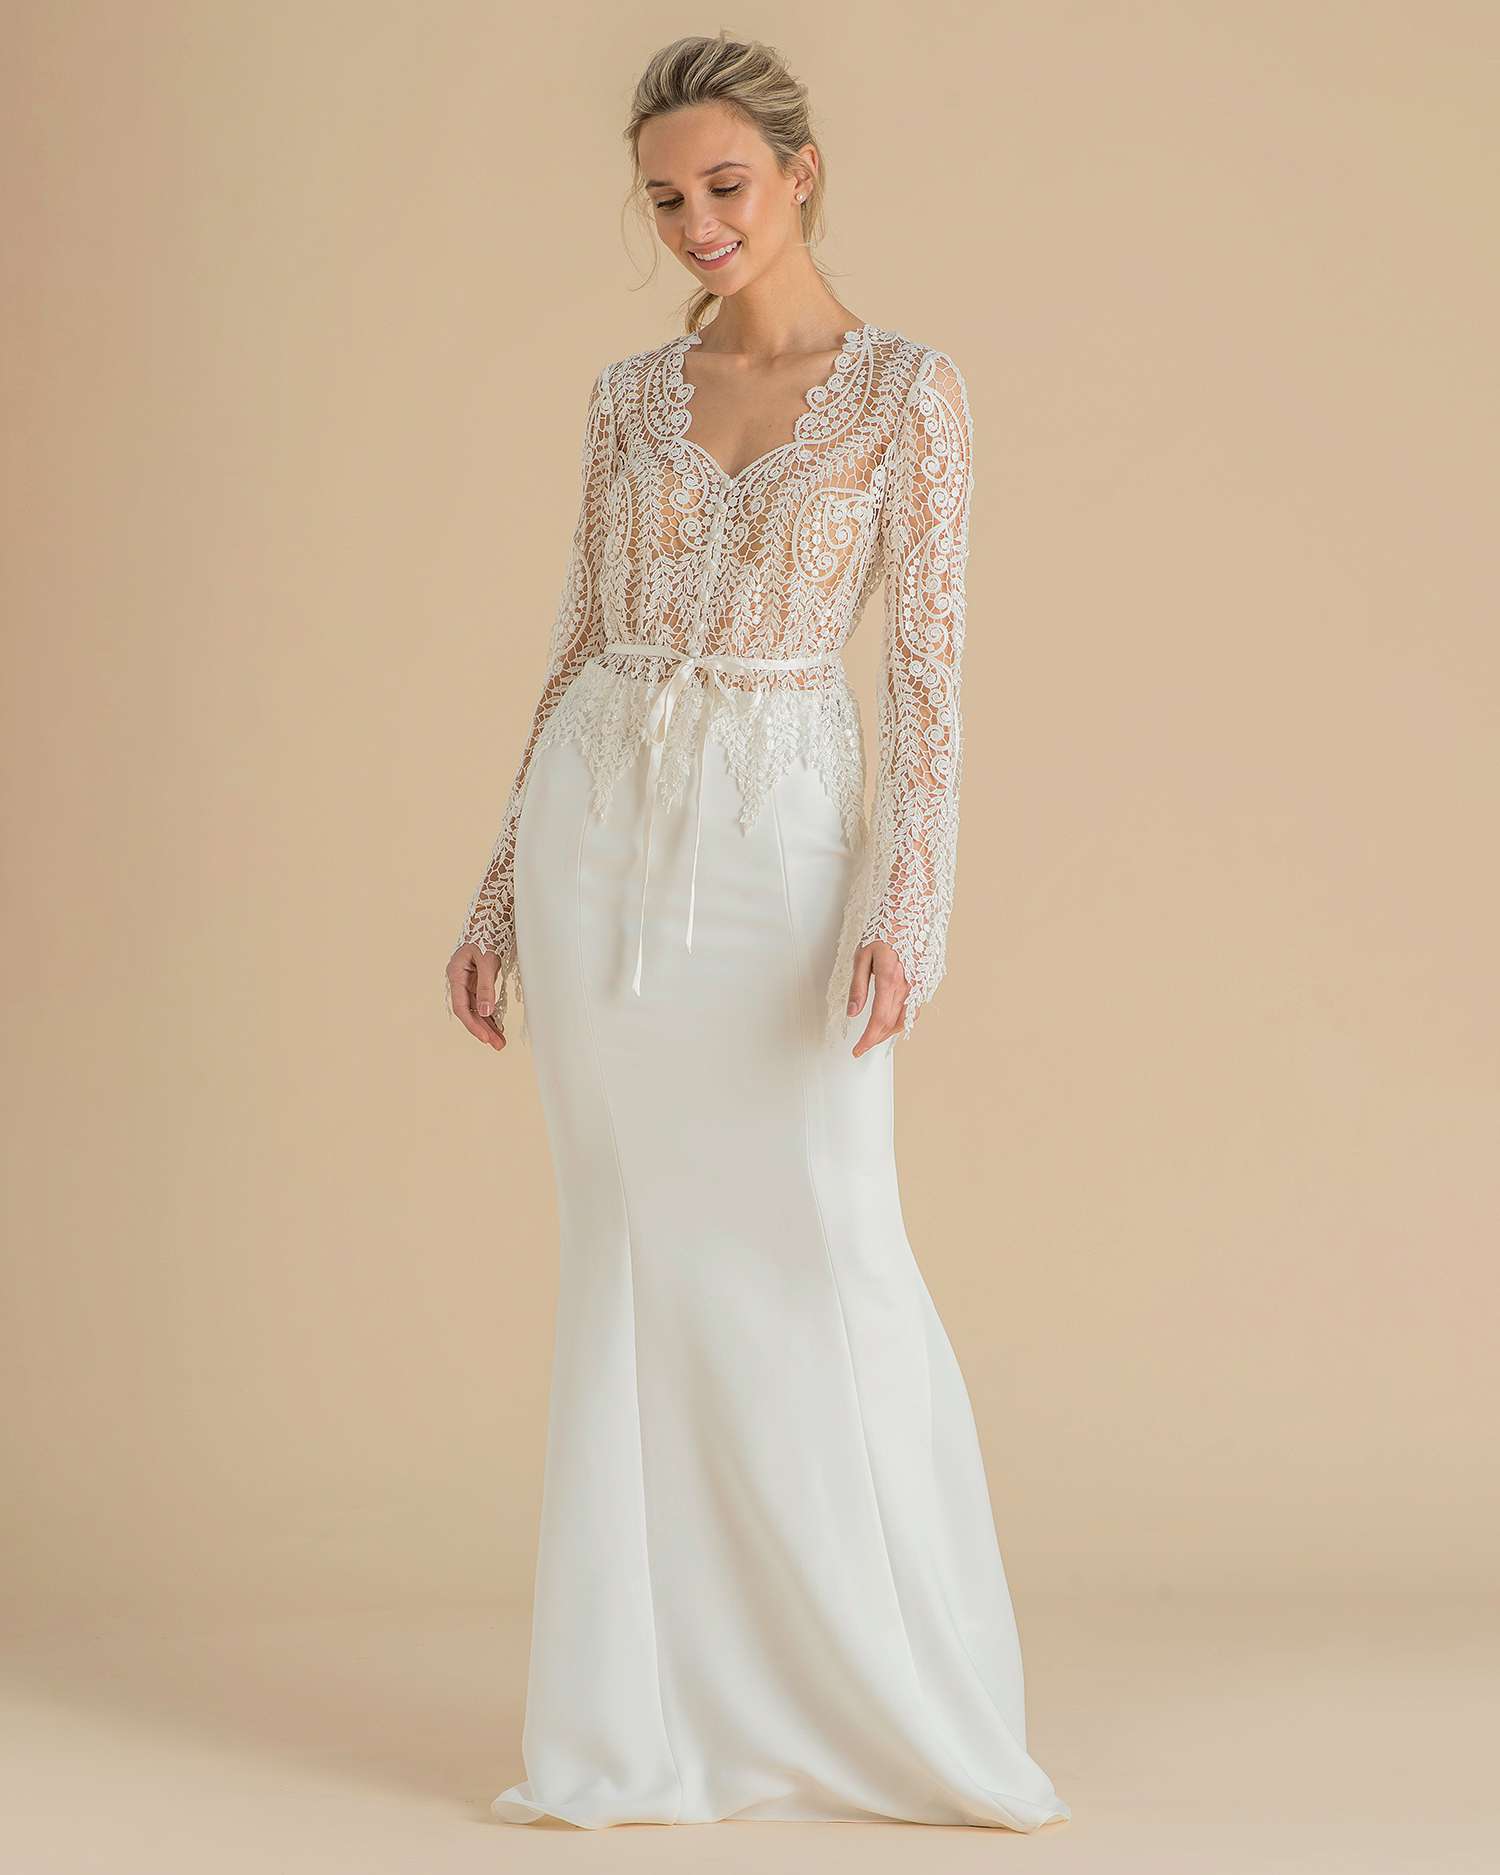 catherine deane wedding dress spring 2019 lace net top